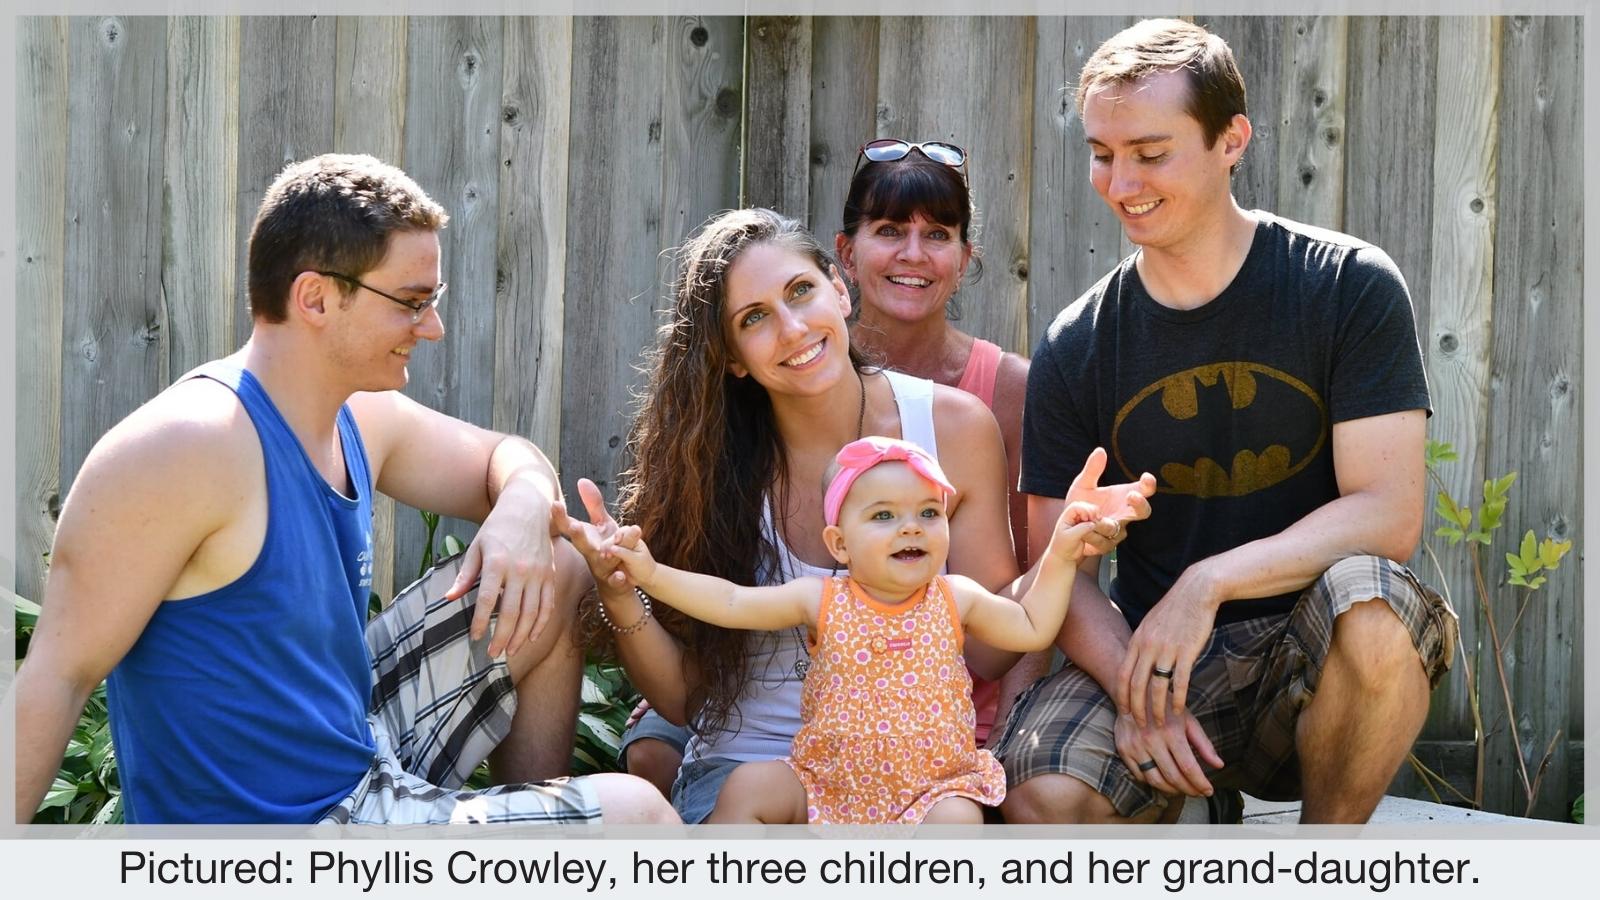 Phyllis Crowley, her three children, and her grand-daughter